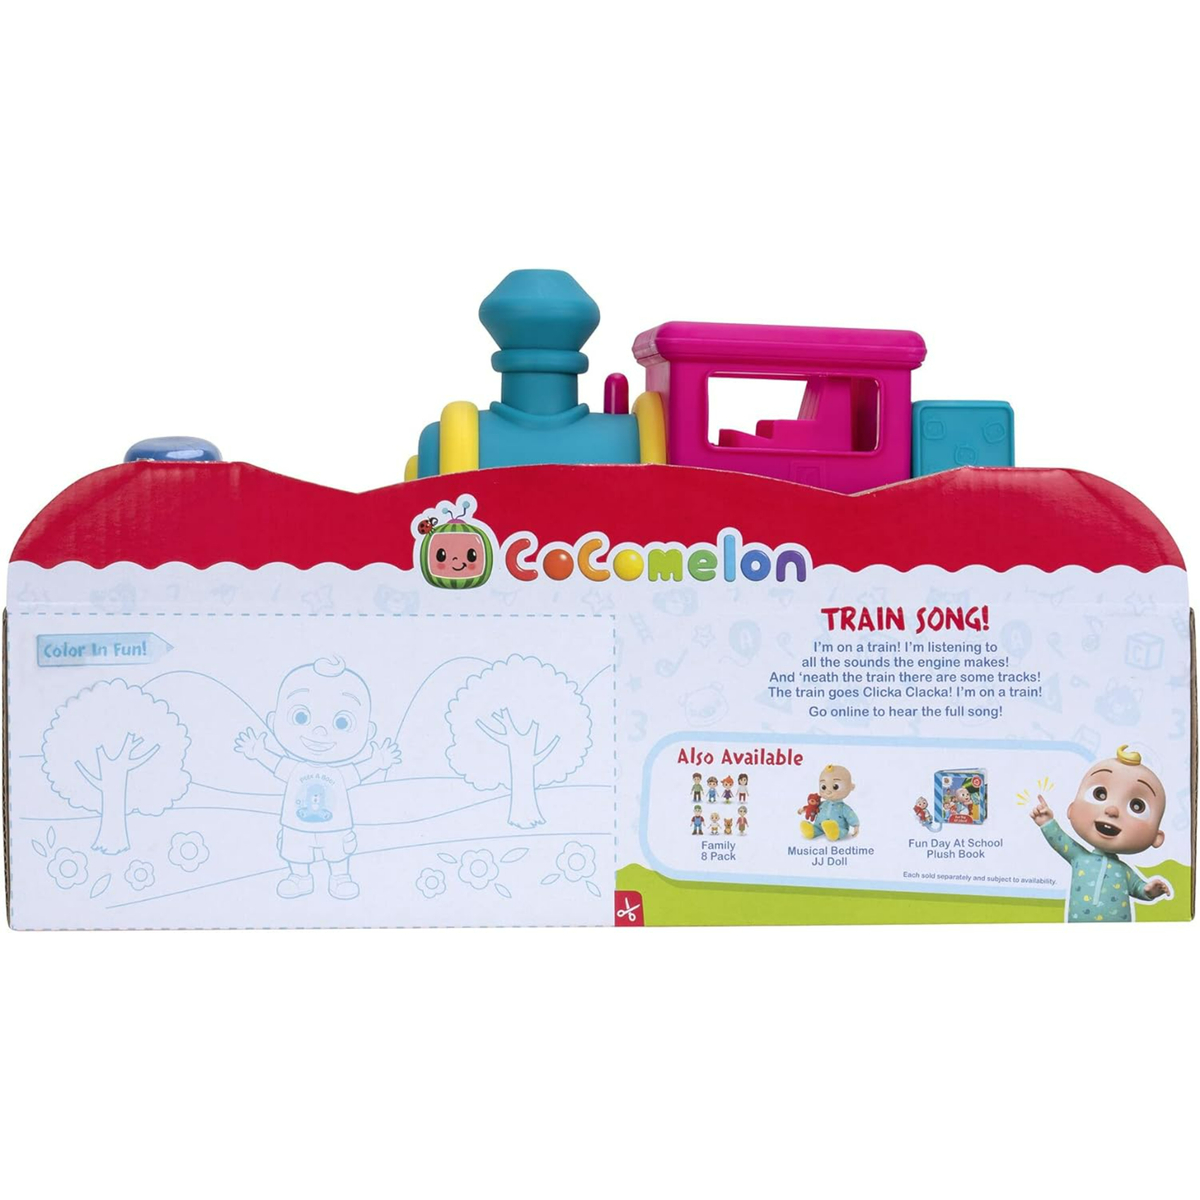 Cocomelon Feature Vehicle Musical Train, CMW0080